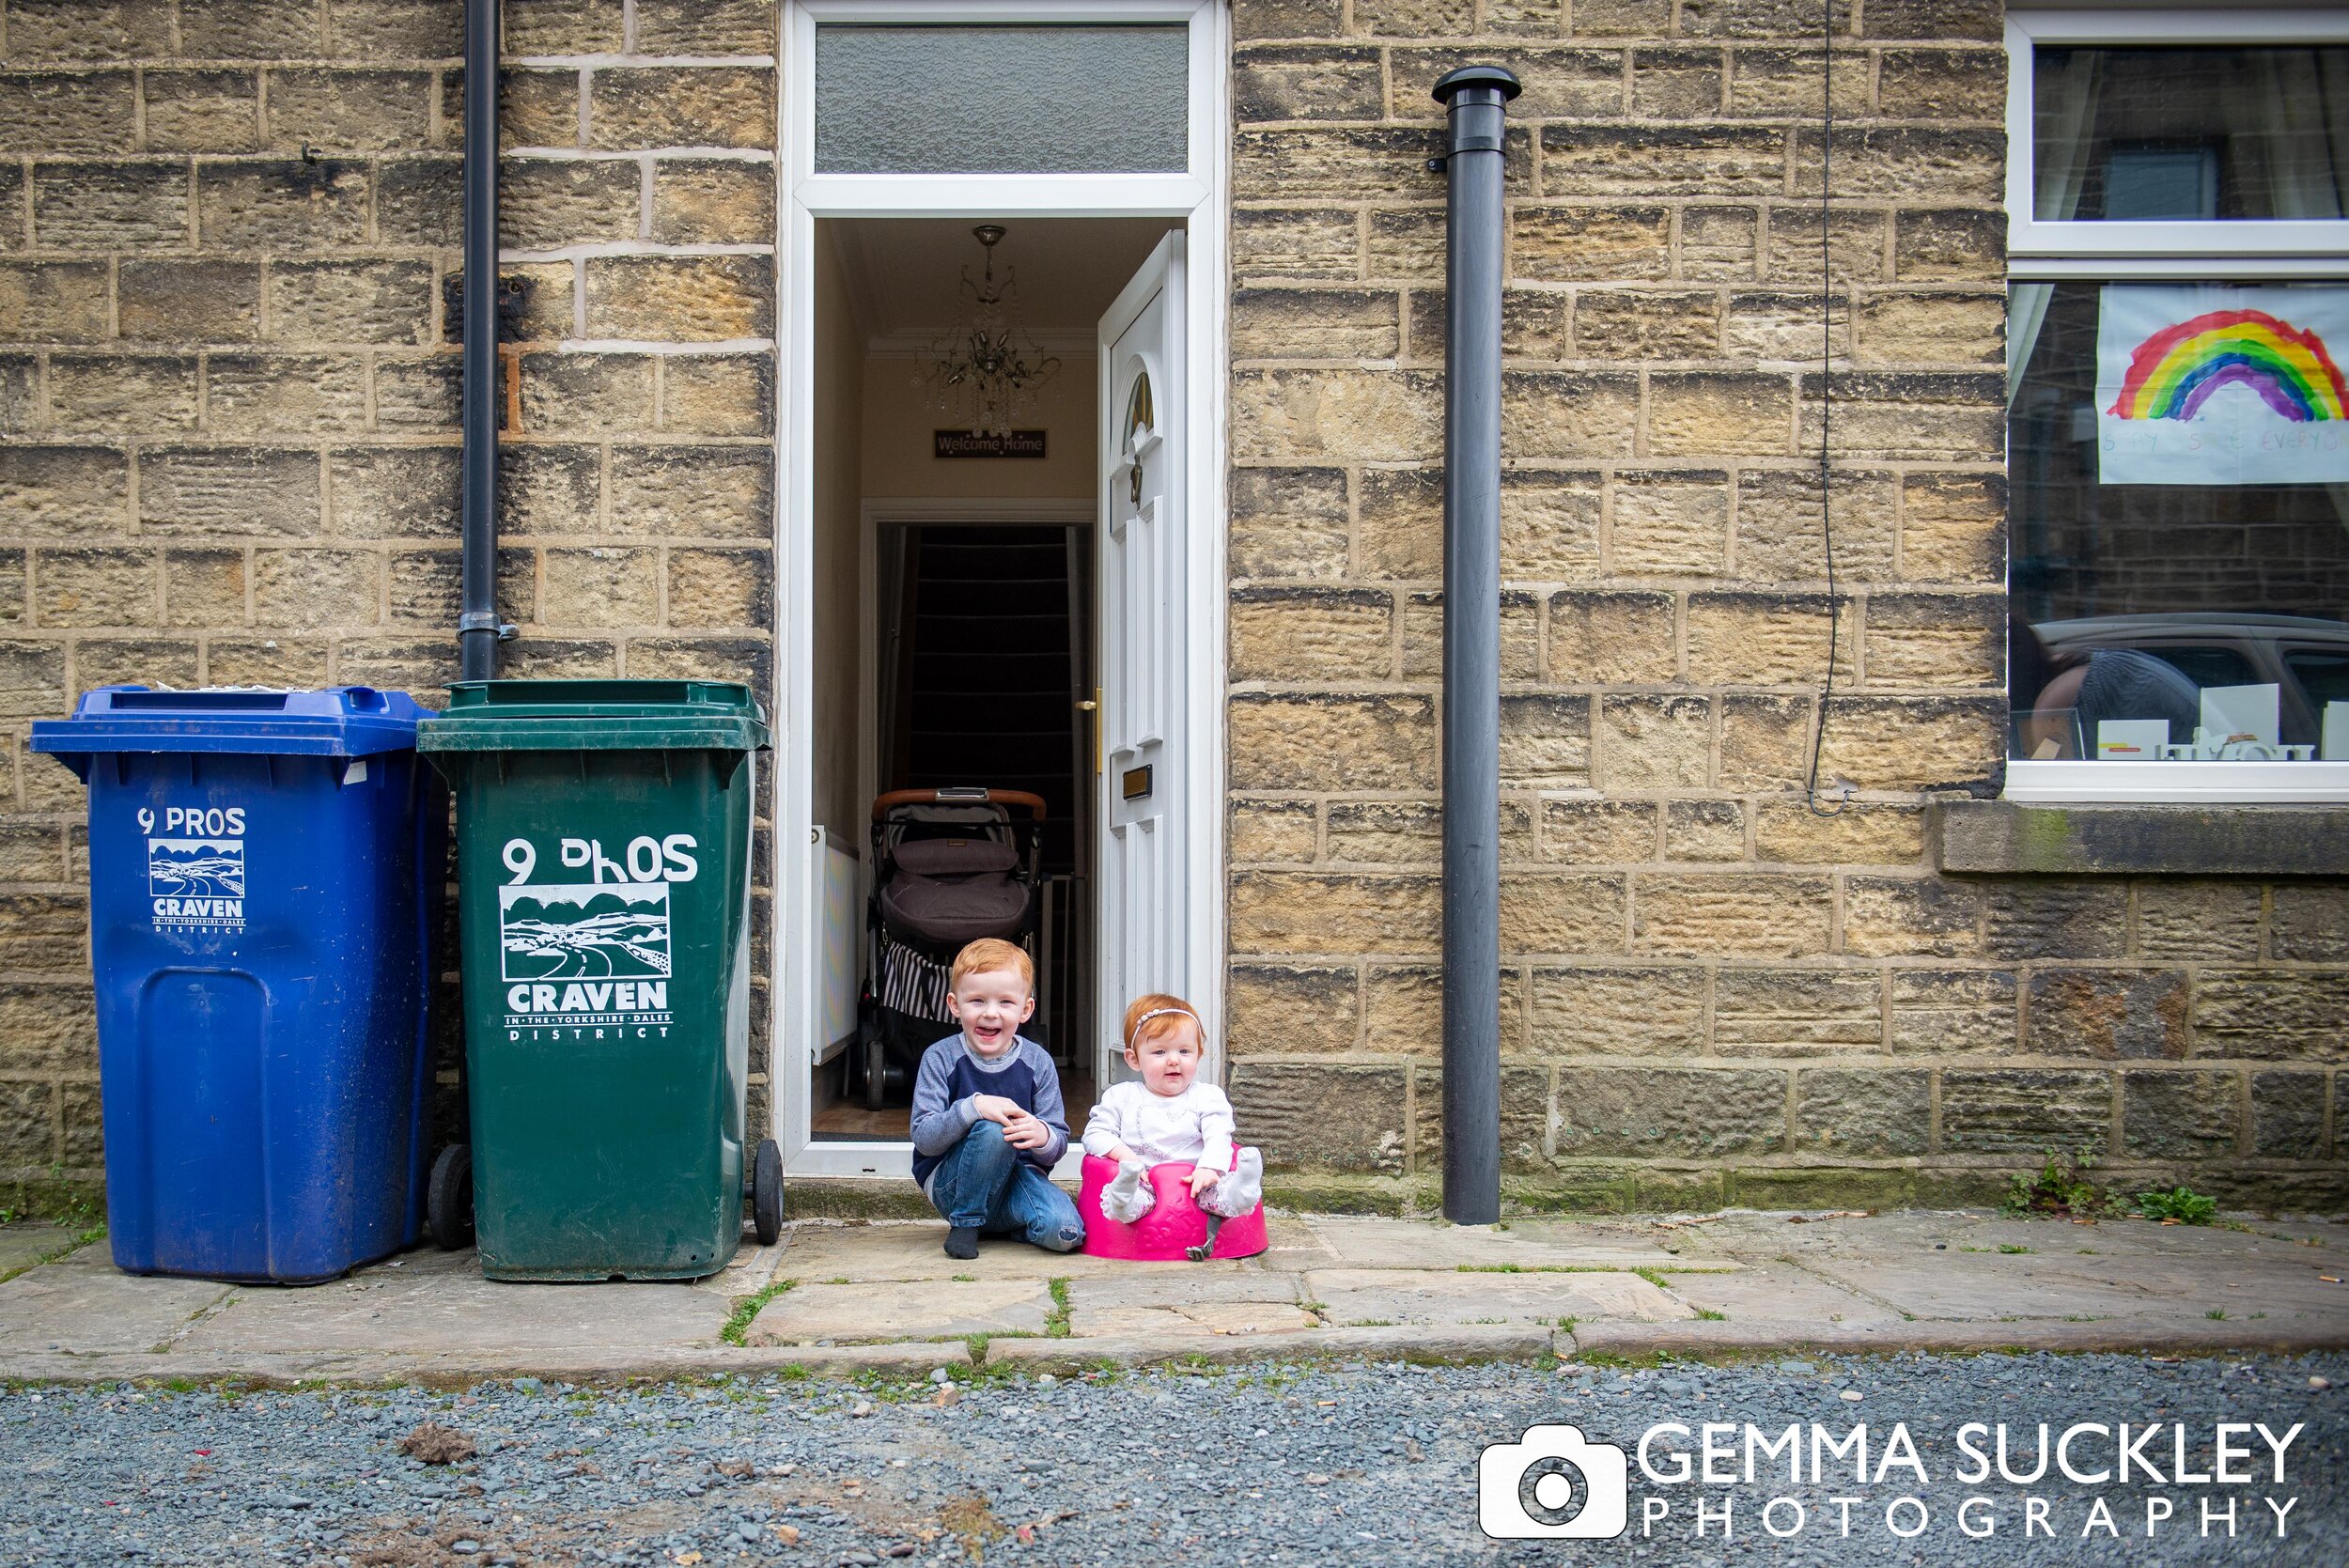 two young children sat outside the door with a rainbow painting in their window